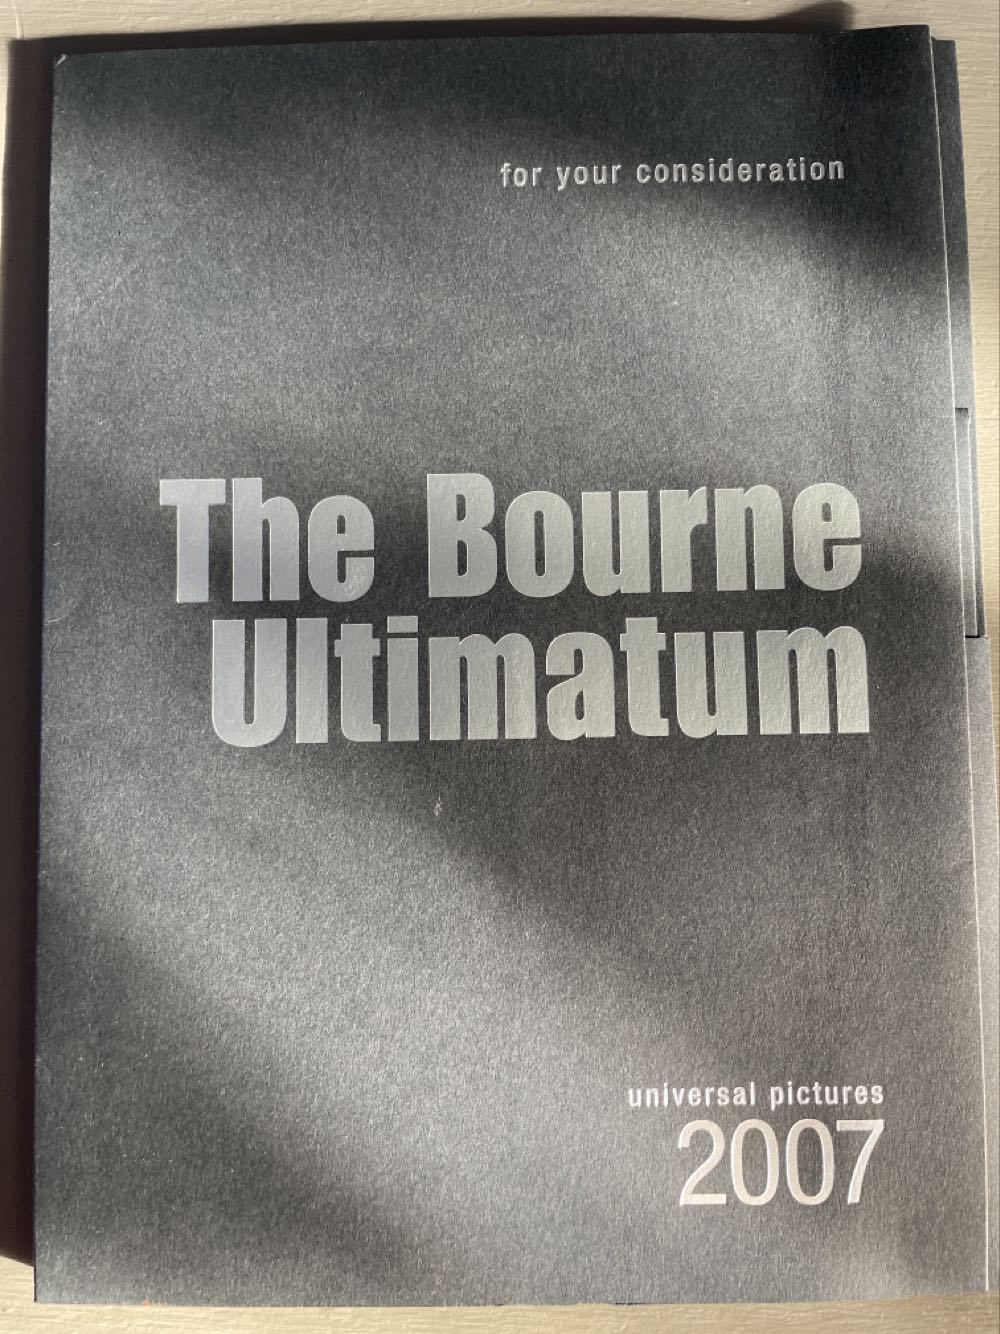 Bourne 3: Ultimatum, The DVD movie collectible [Barcode 025193227522] - Main Image 3